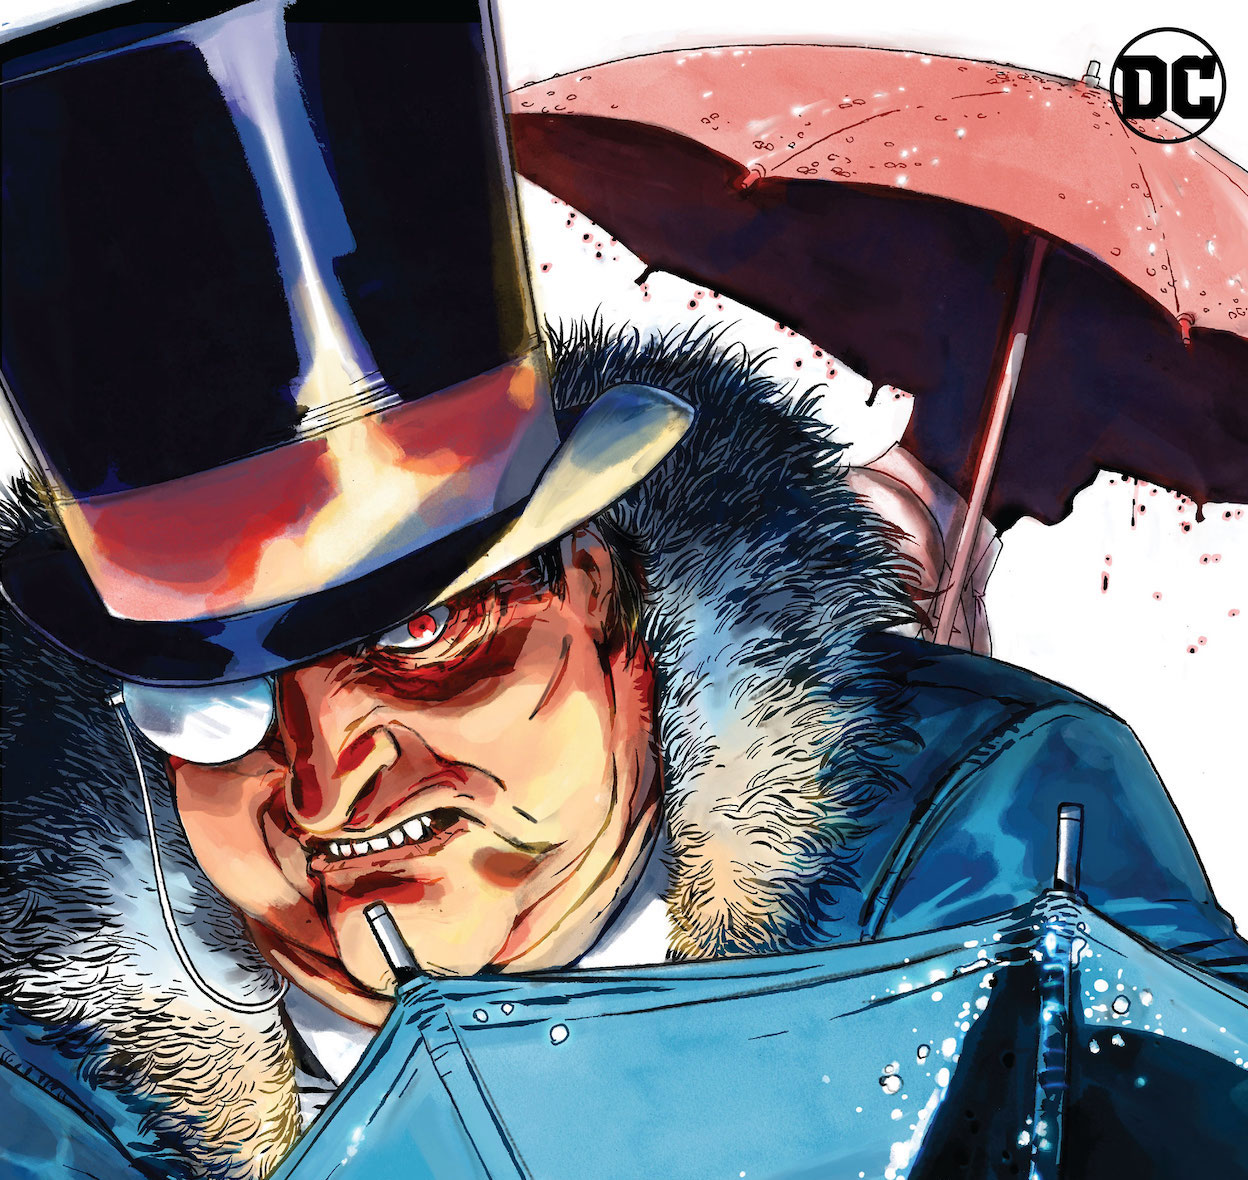 'Batman: One Bad Day – The Penguin' #1 proves Gotham needs Penguin as much as Batman